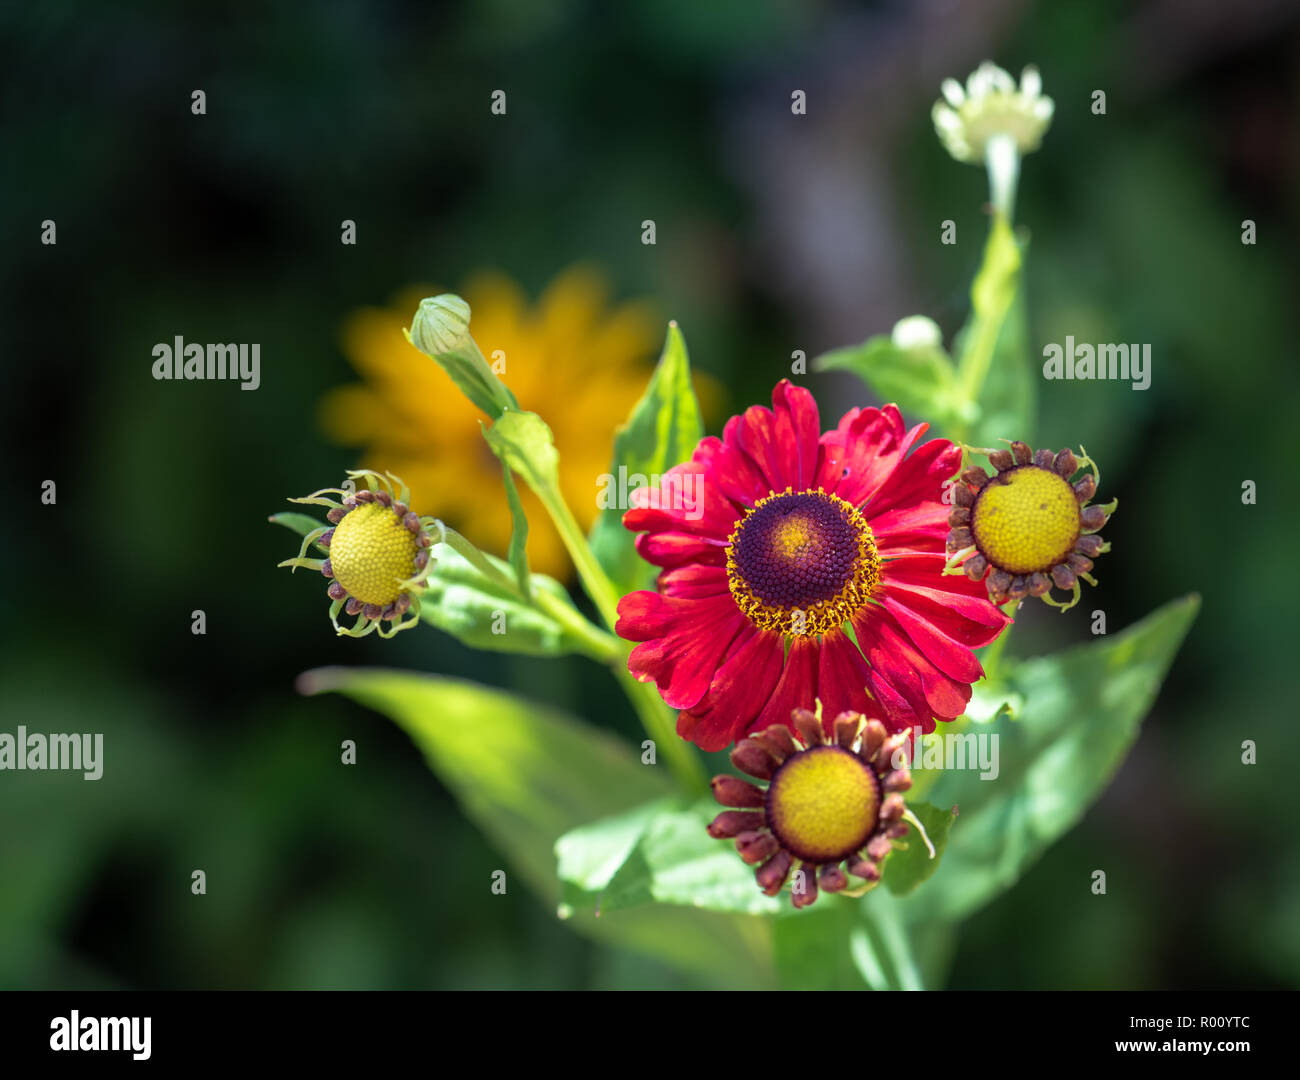 Natural floral colorful outdoor macro of a stem of  yellow red helenium / bride of the sun blossoms,buds,blurred green background,sunny summer day Stock Photo